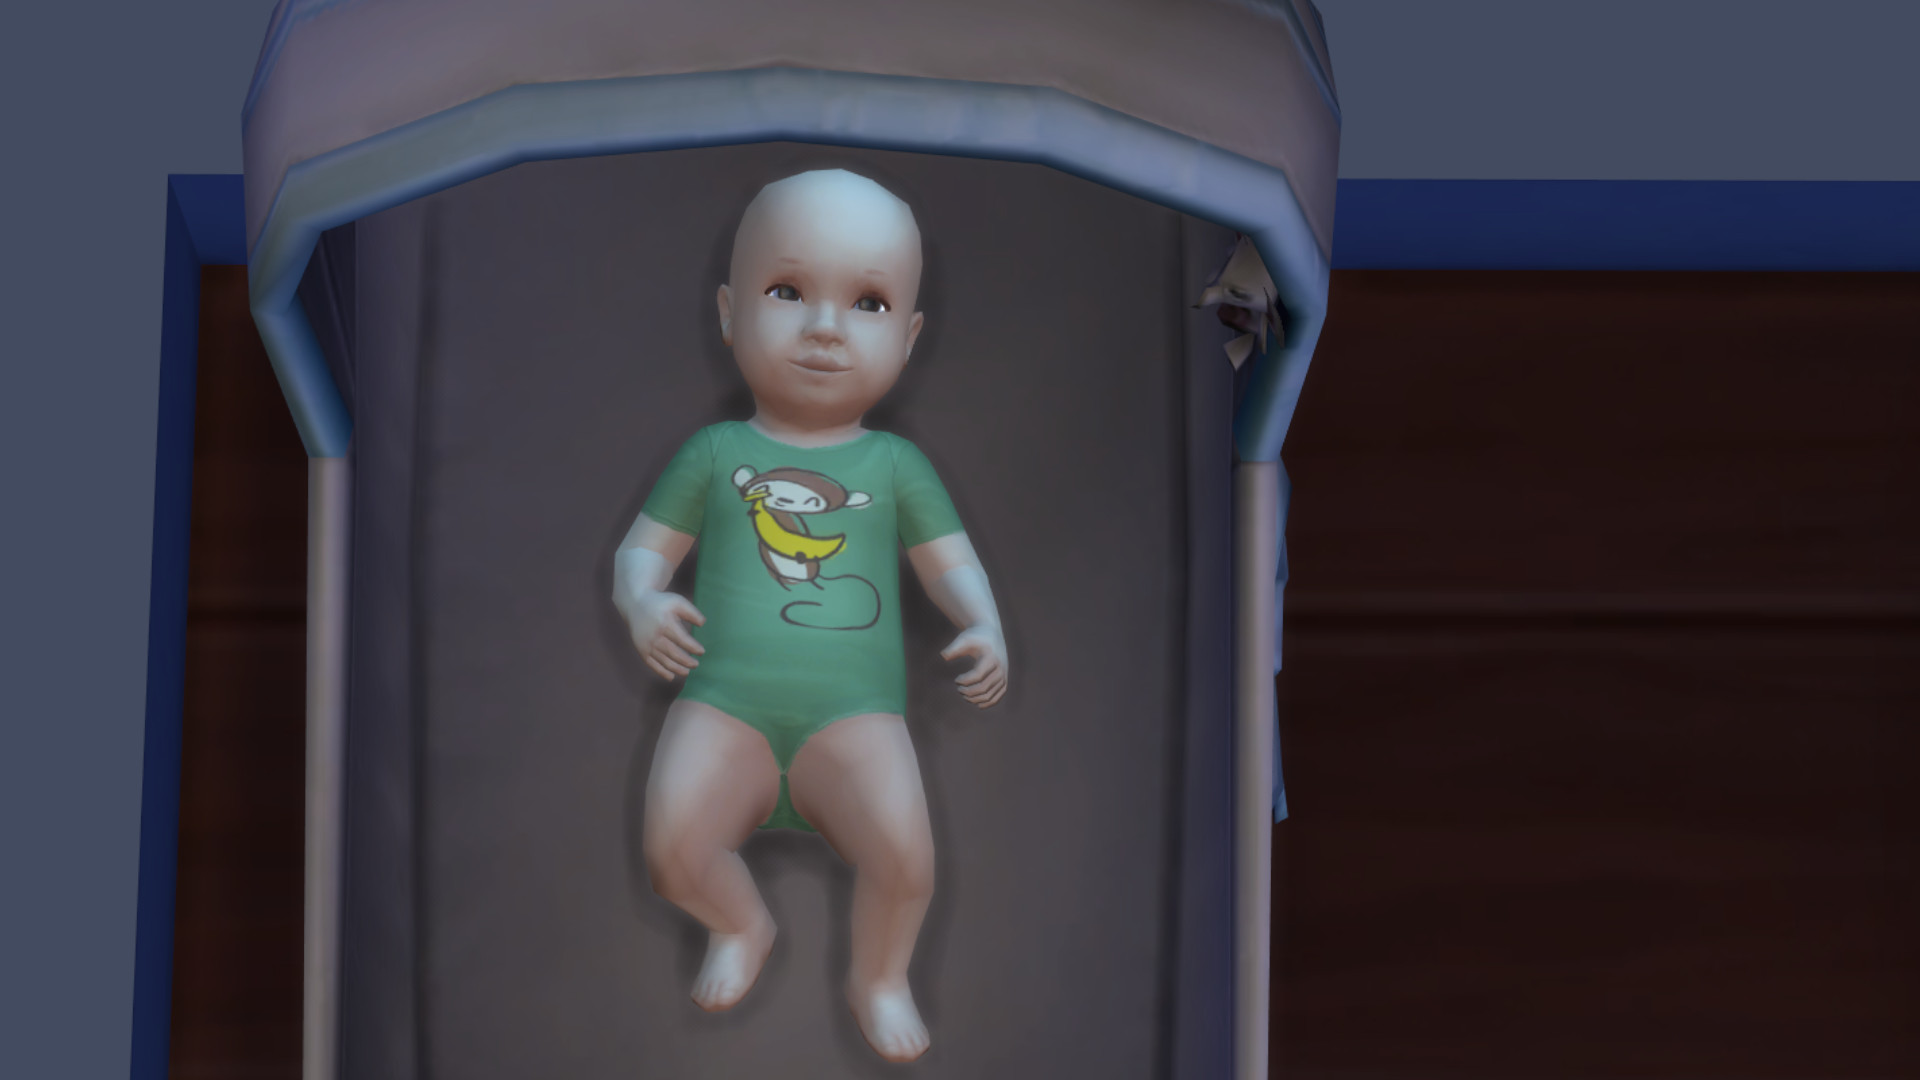 Posepack Includes Sims Baby Sims 4 Toddler The Sims 4 Packs Images